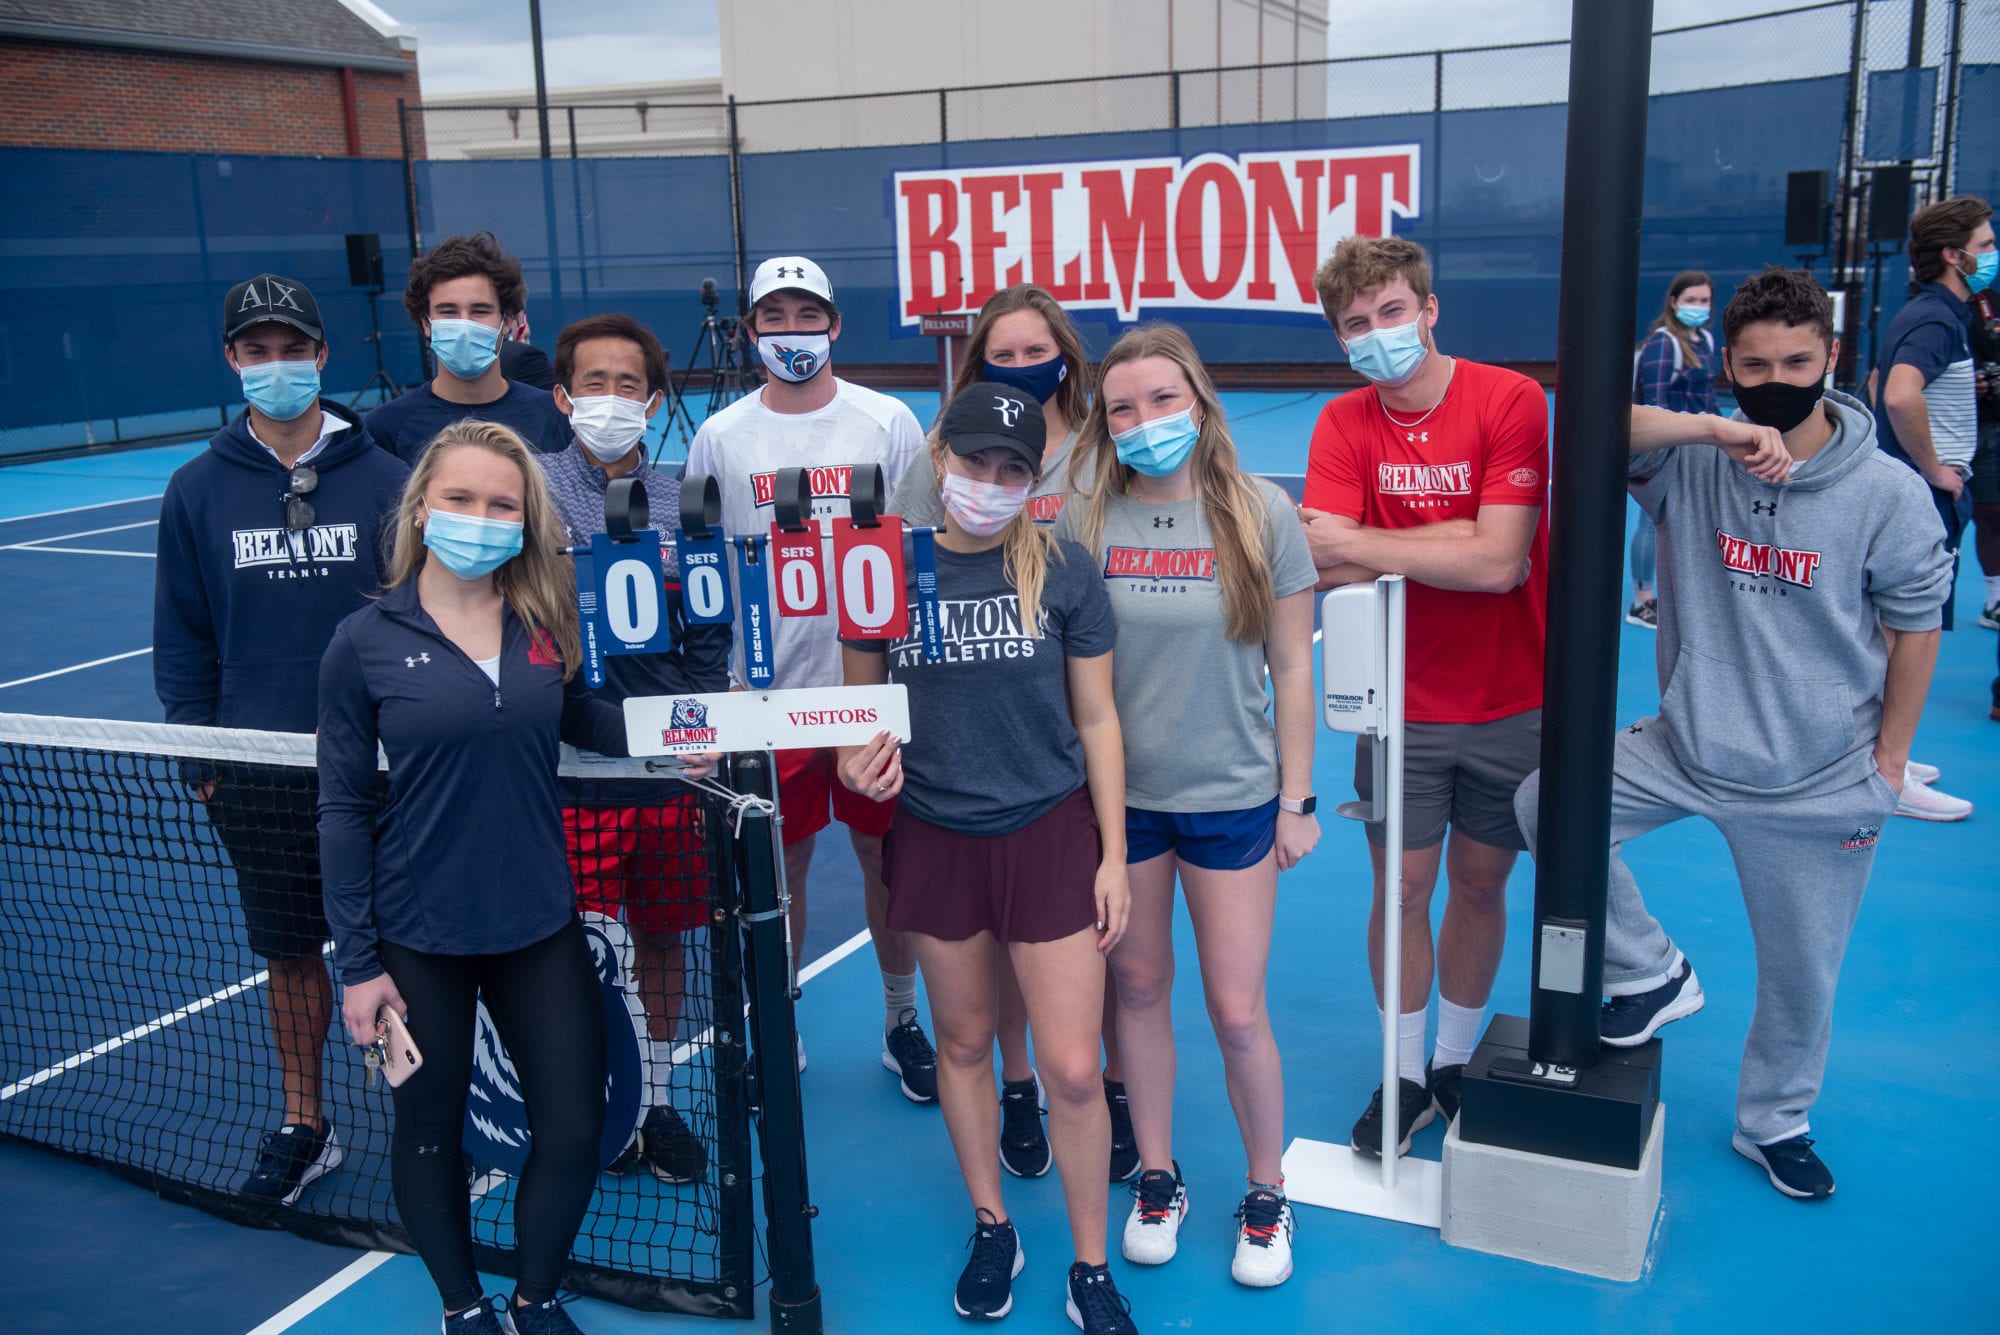 Tennis team members pose for a picture after a ribbon cutting ceremony opening Belmont's new rooftop tennis facility.